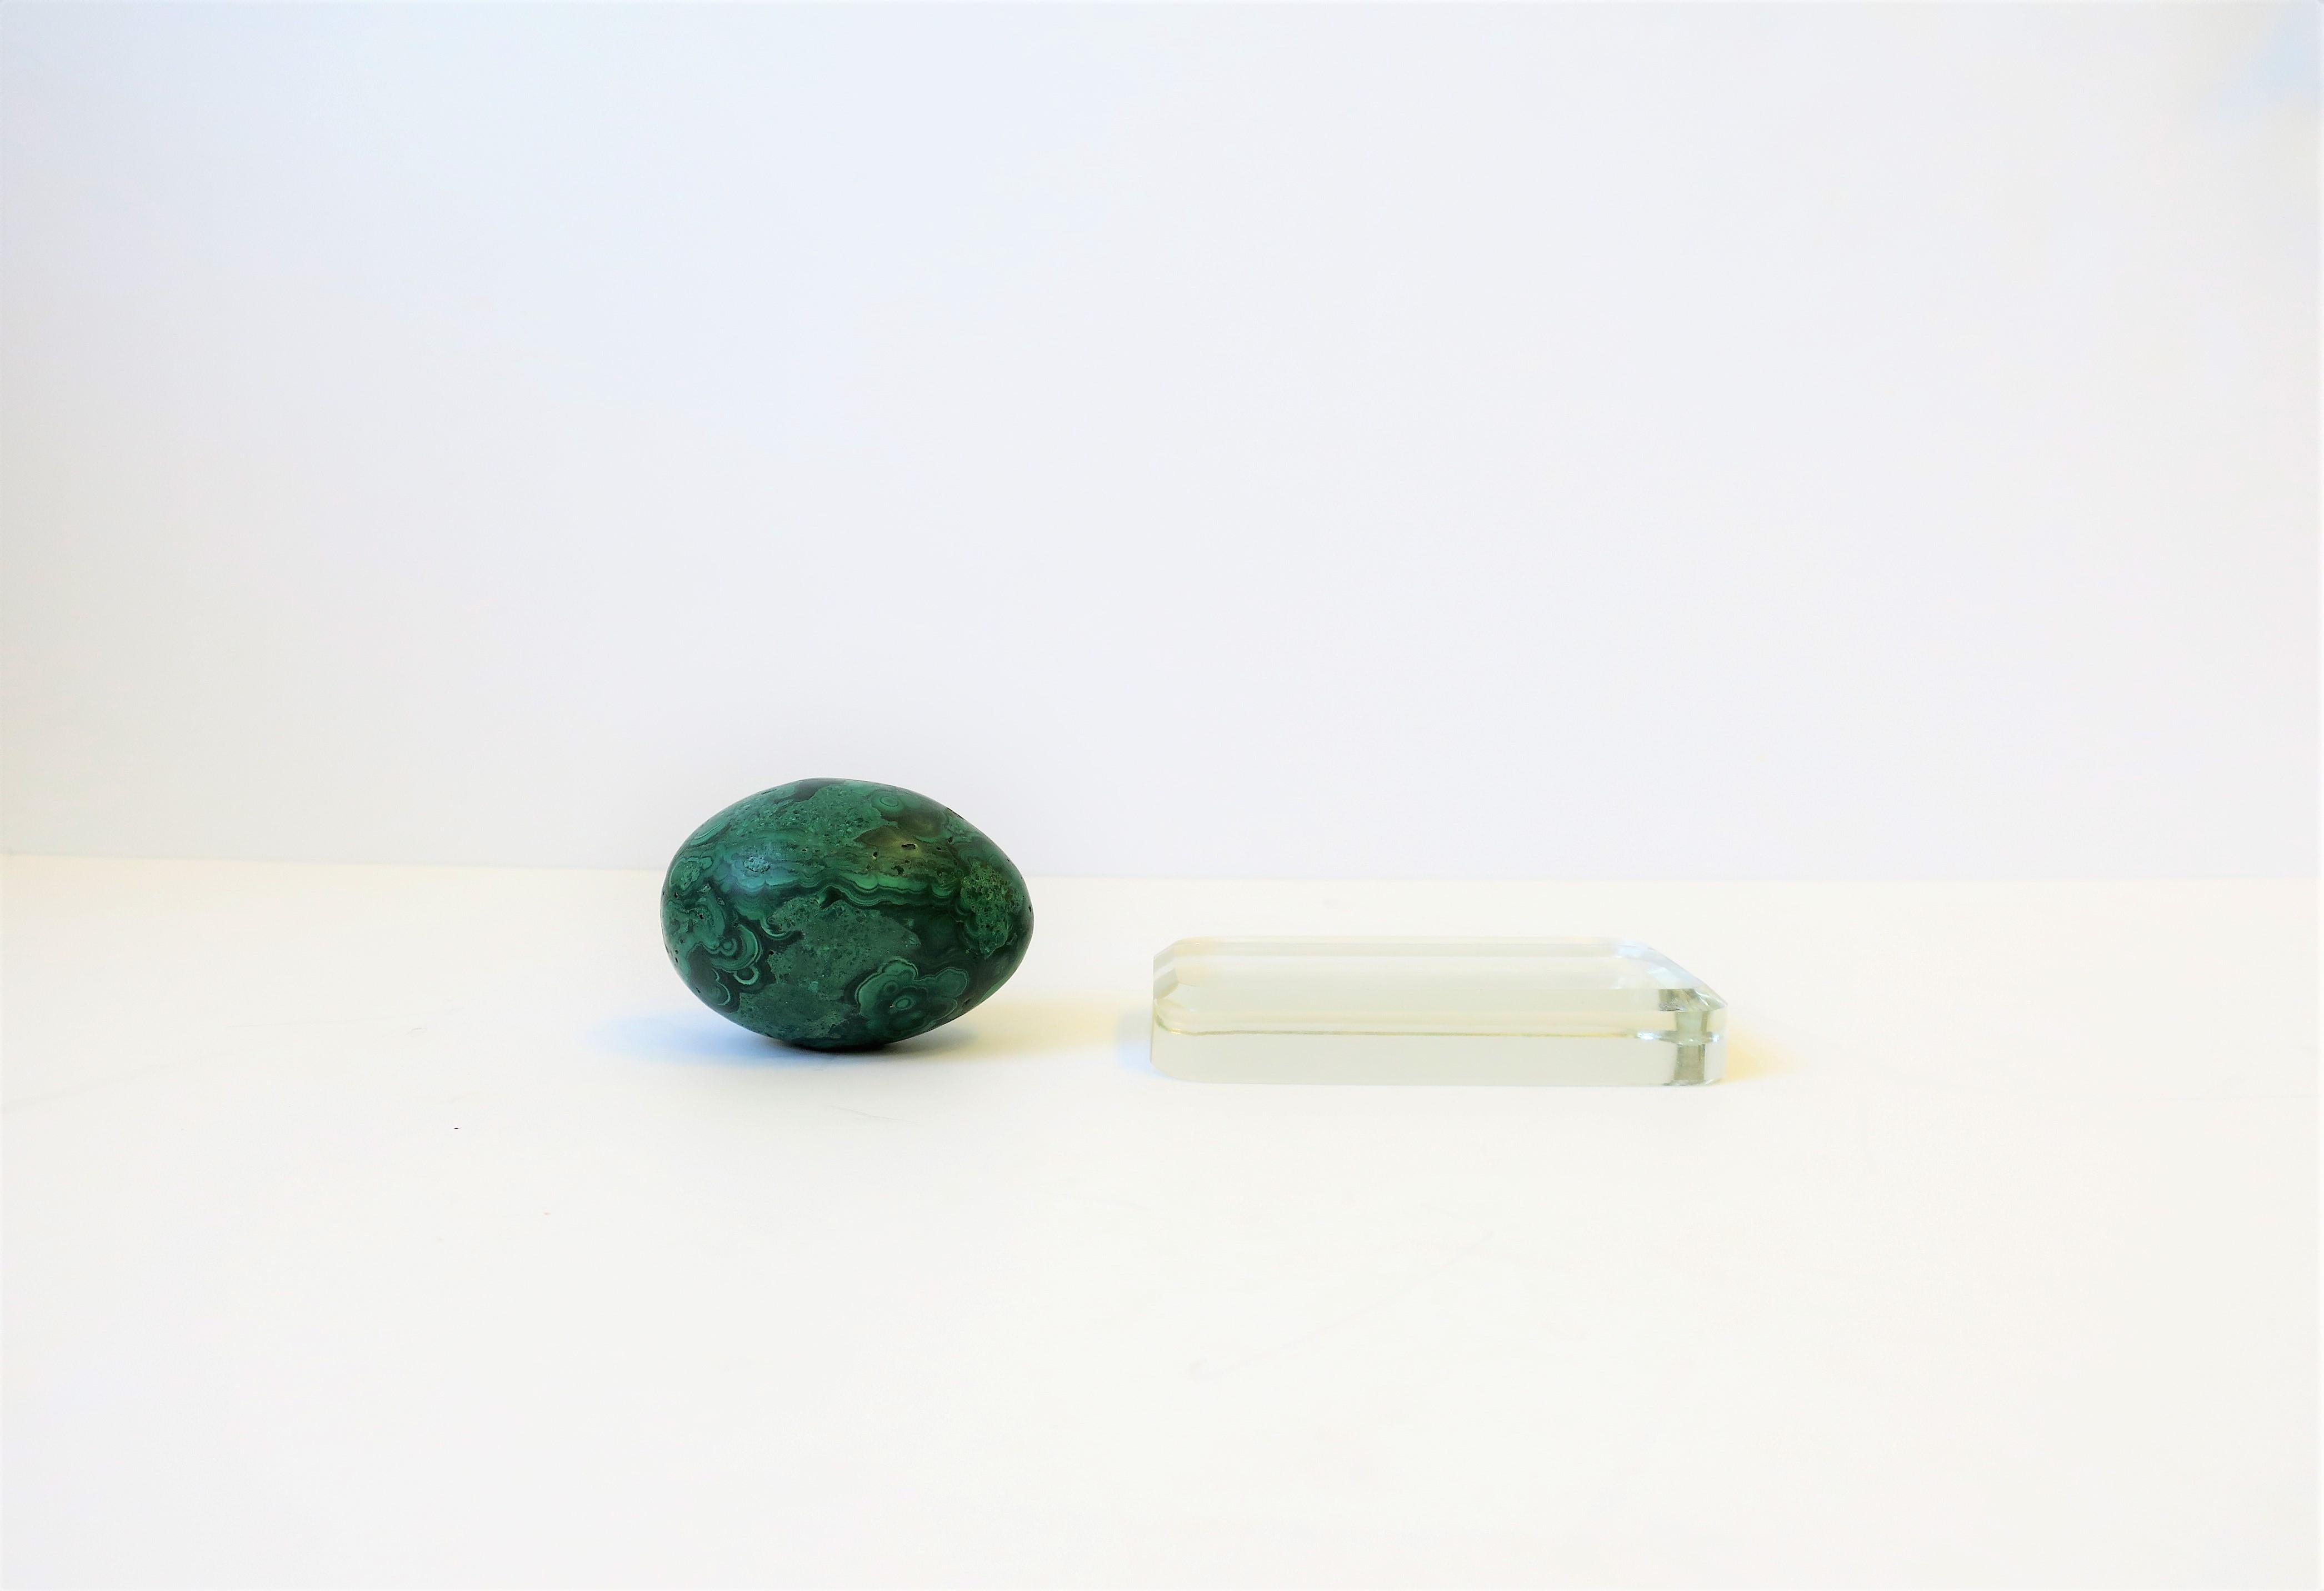 Green Malachite Sculpture and Crystal Plinth Decorative Object 2